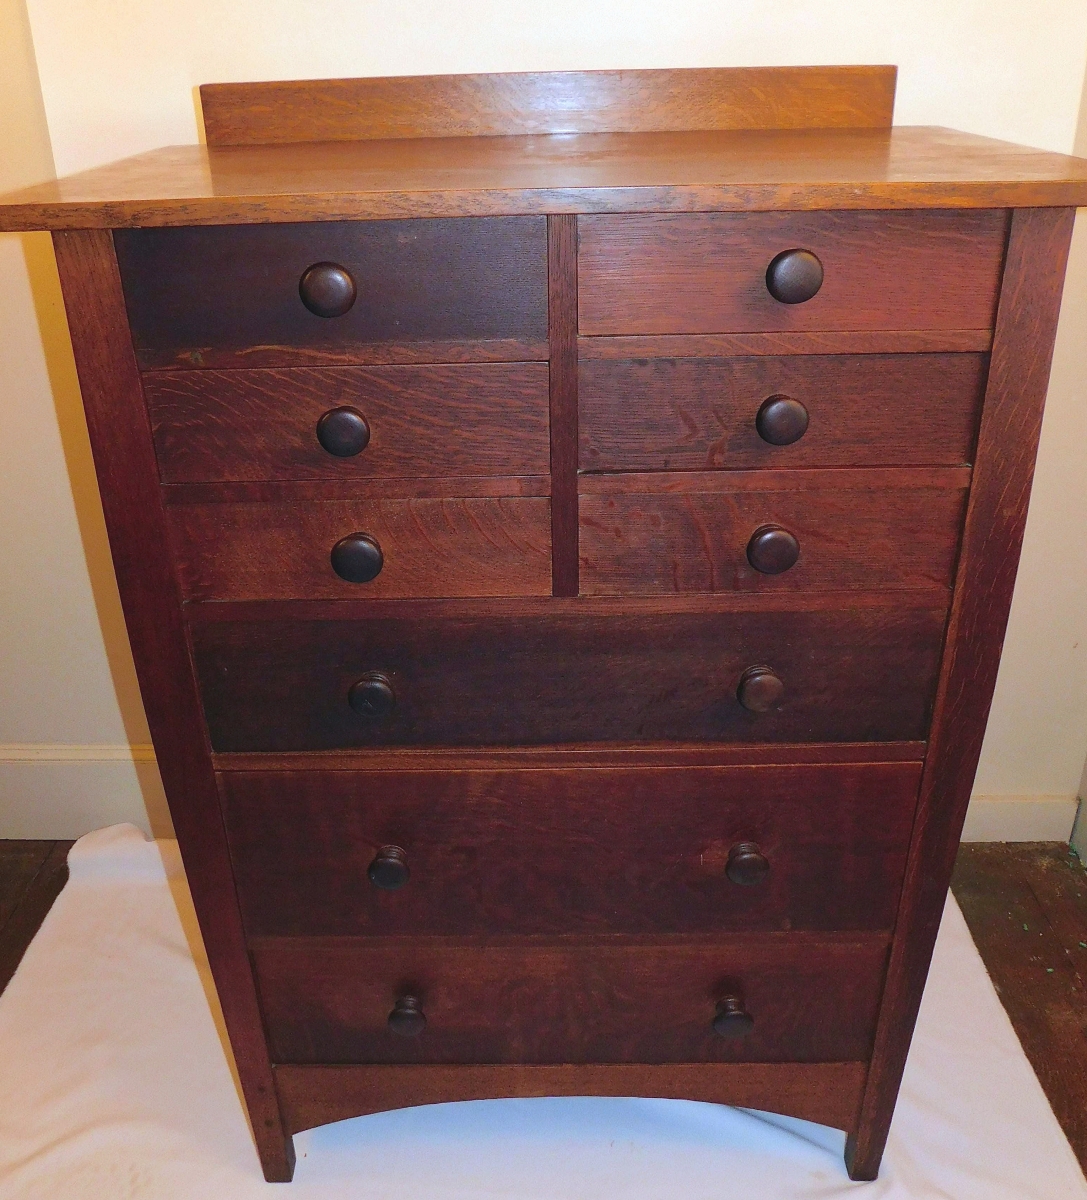 The trade buyer of the Limbert cabinet also purchased this oak nine-drawer tall chest for $7,198. It had been designed by Harvey Ellis for Gustav Stickley around 1904 and retained its labels. It was from an estate on Martha’s Vineyard that was the source for several of the other Arts and Crafts pieces ($5/7,000).